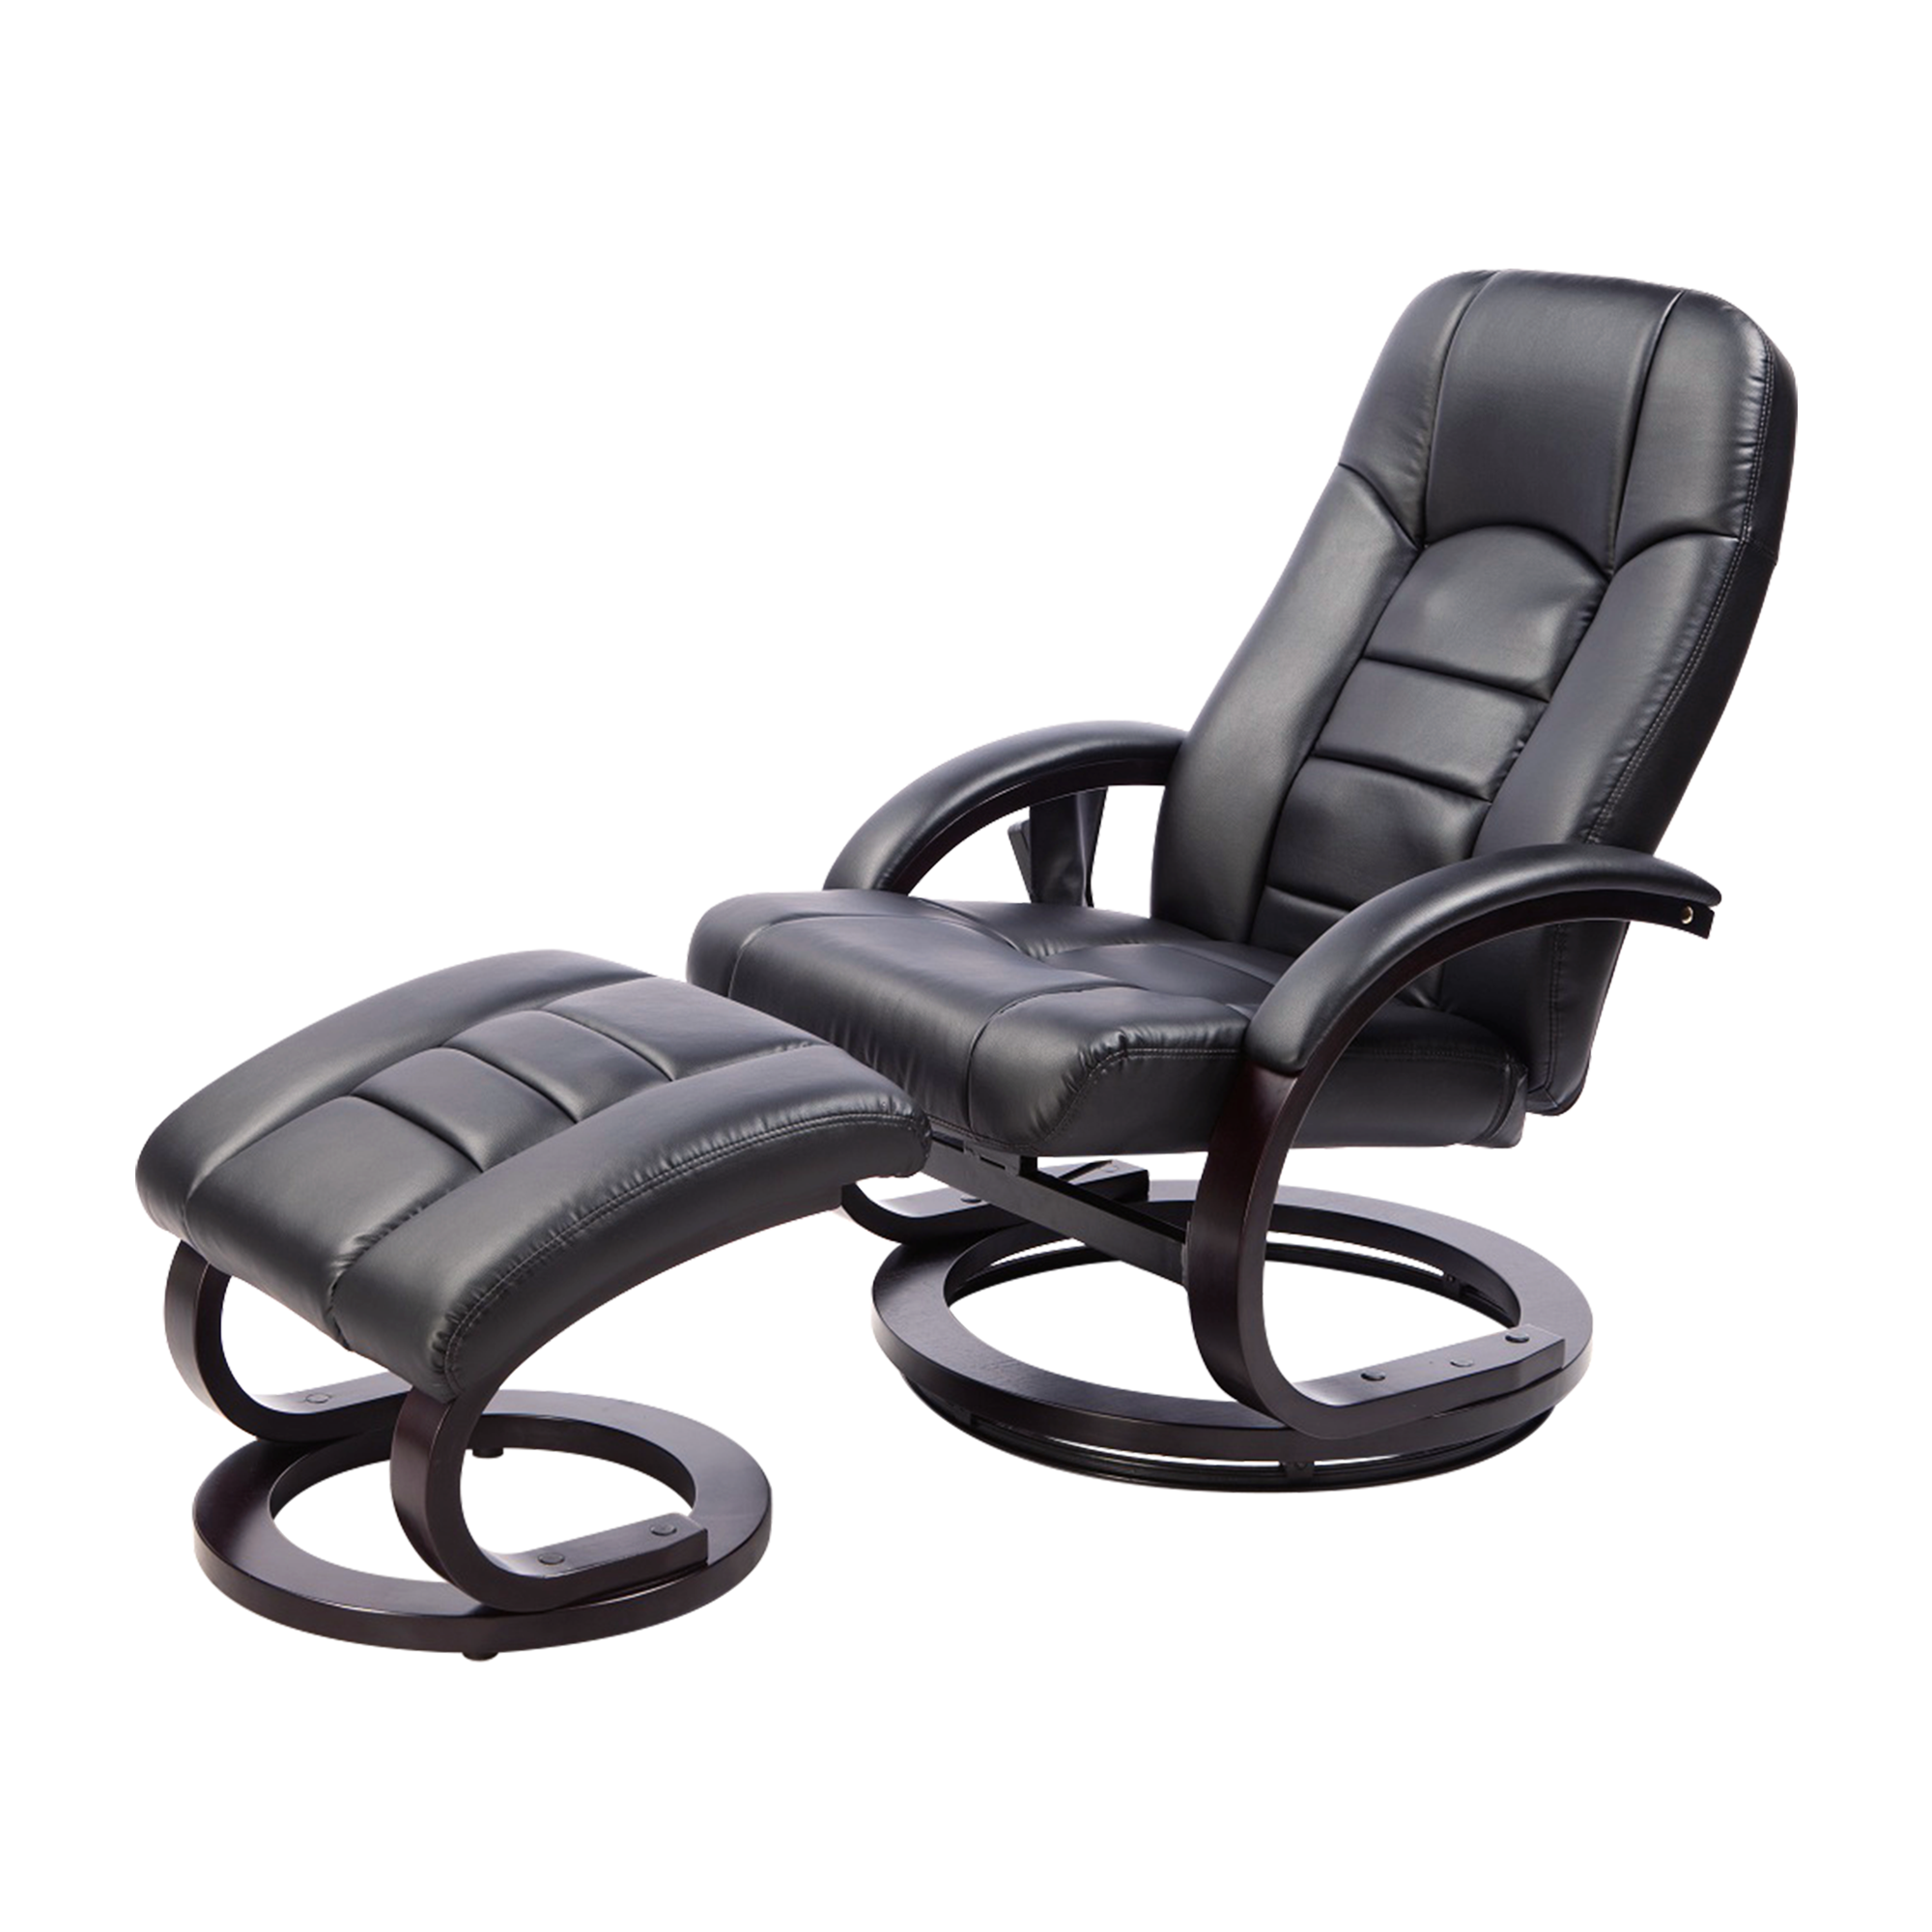 PU Leather Massage Chair Recliner Ottoman Lounge Remote 